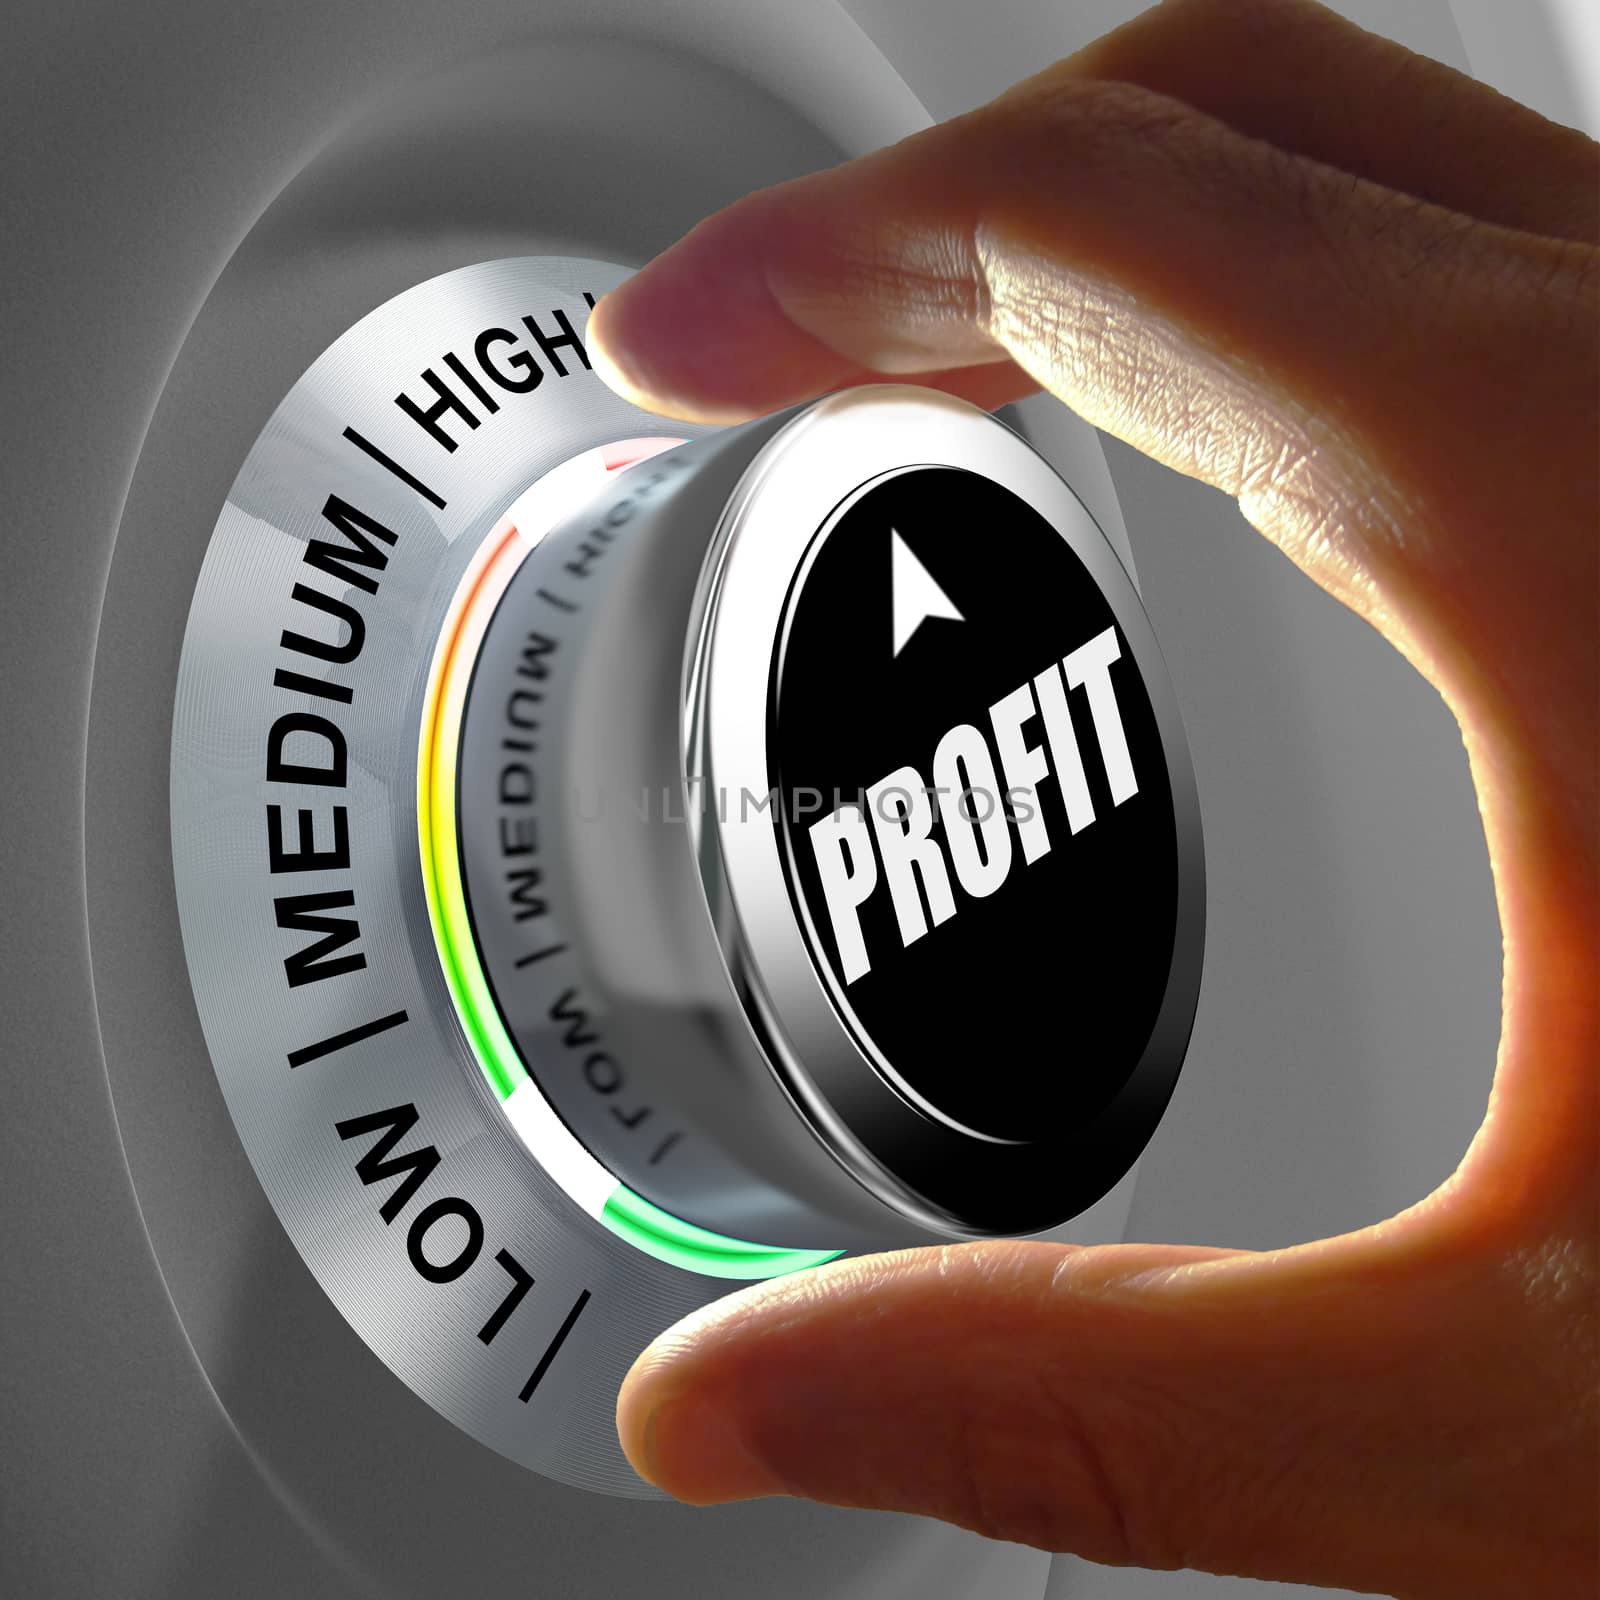 Hand rotating a button and selecting the level of profit. This concept illustration is a metaphor for choosing the level of profit. Three levels are available: low, medium and high.